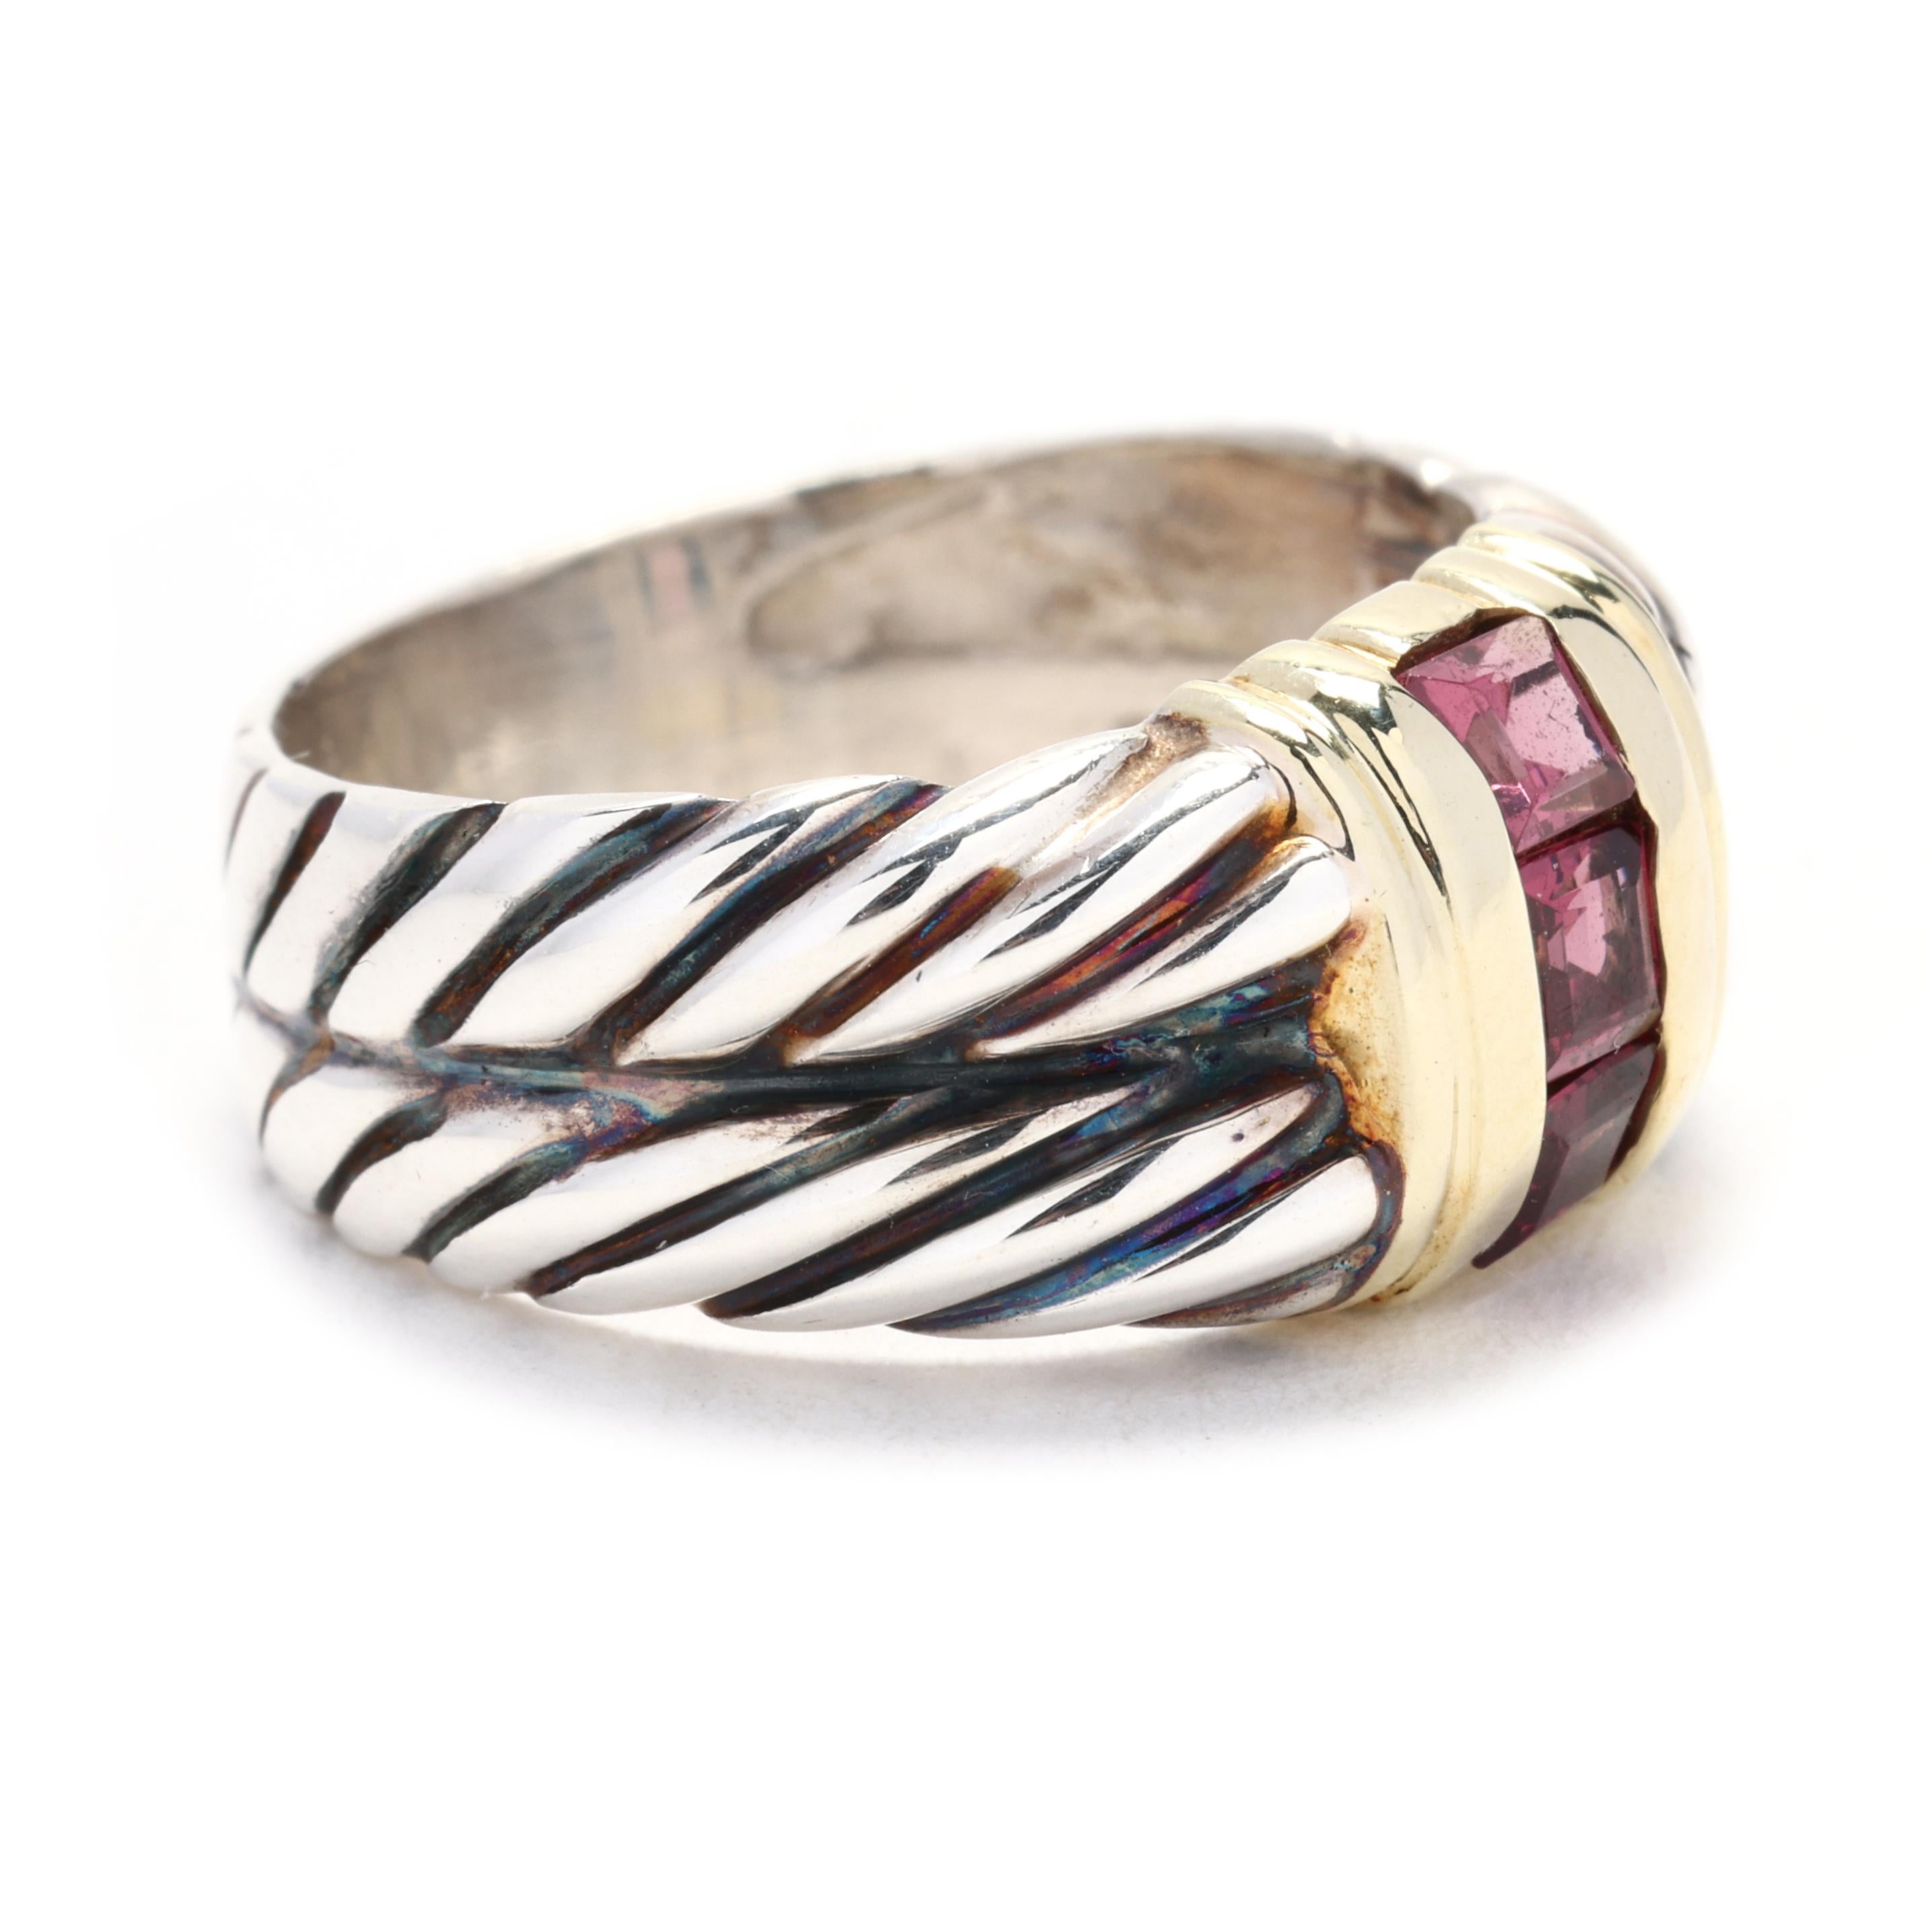 This beautiful David Yurman pink tourmaline double rope band ring is made from 14k yellow gold and sterling silver. The ring features two twisted rope bands, one in yellow gold and one in silver, which are intertwined to create a unique and